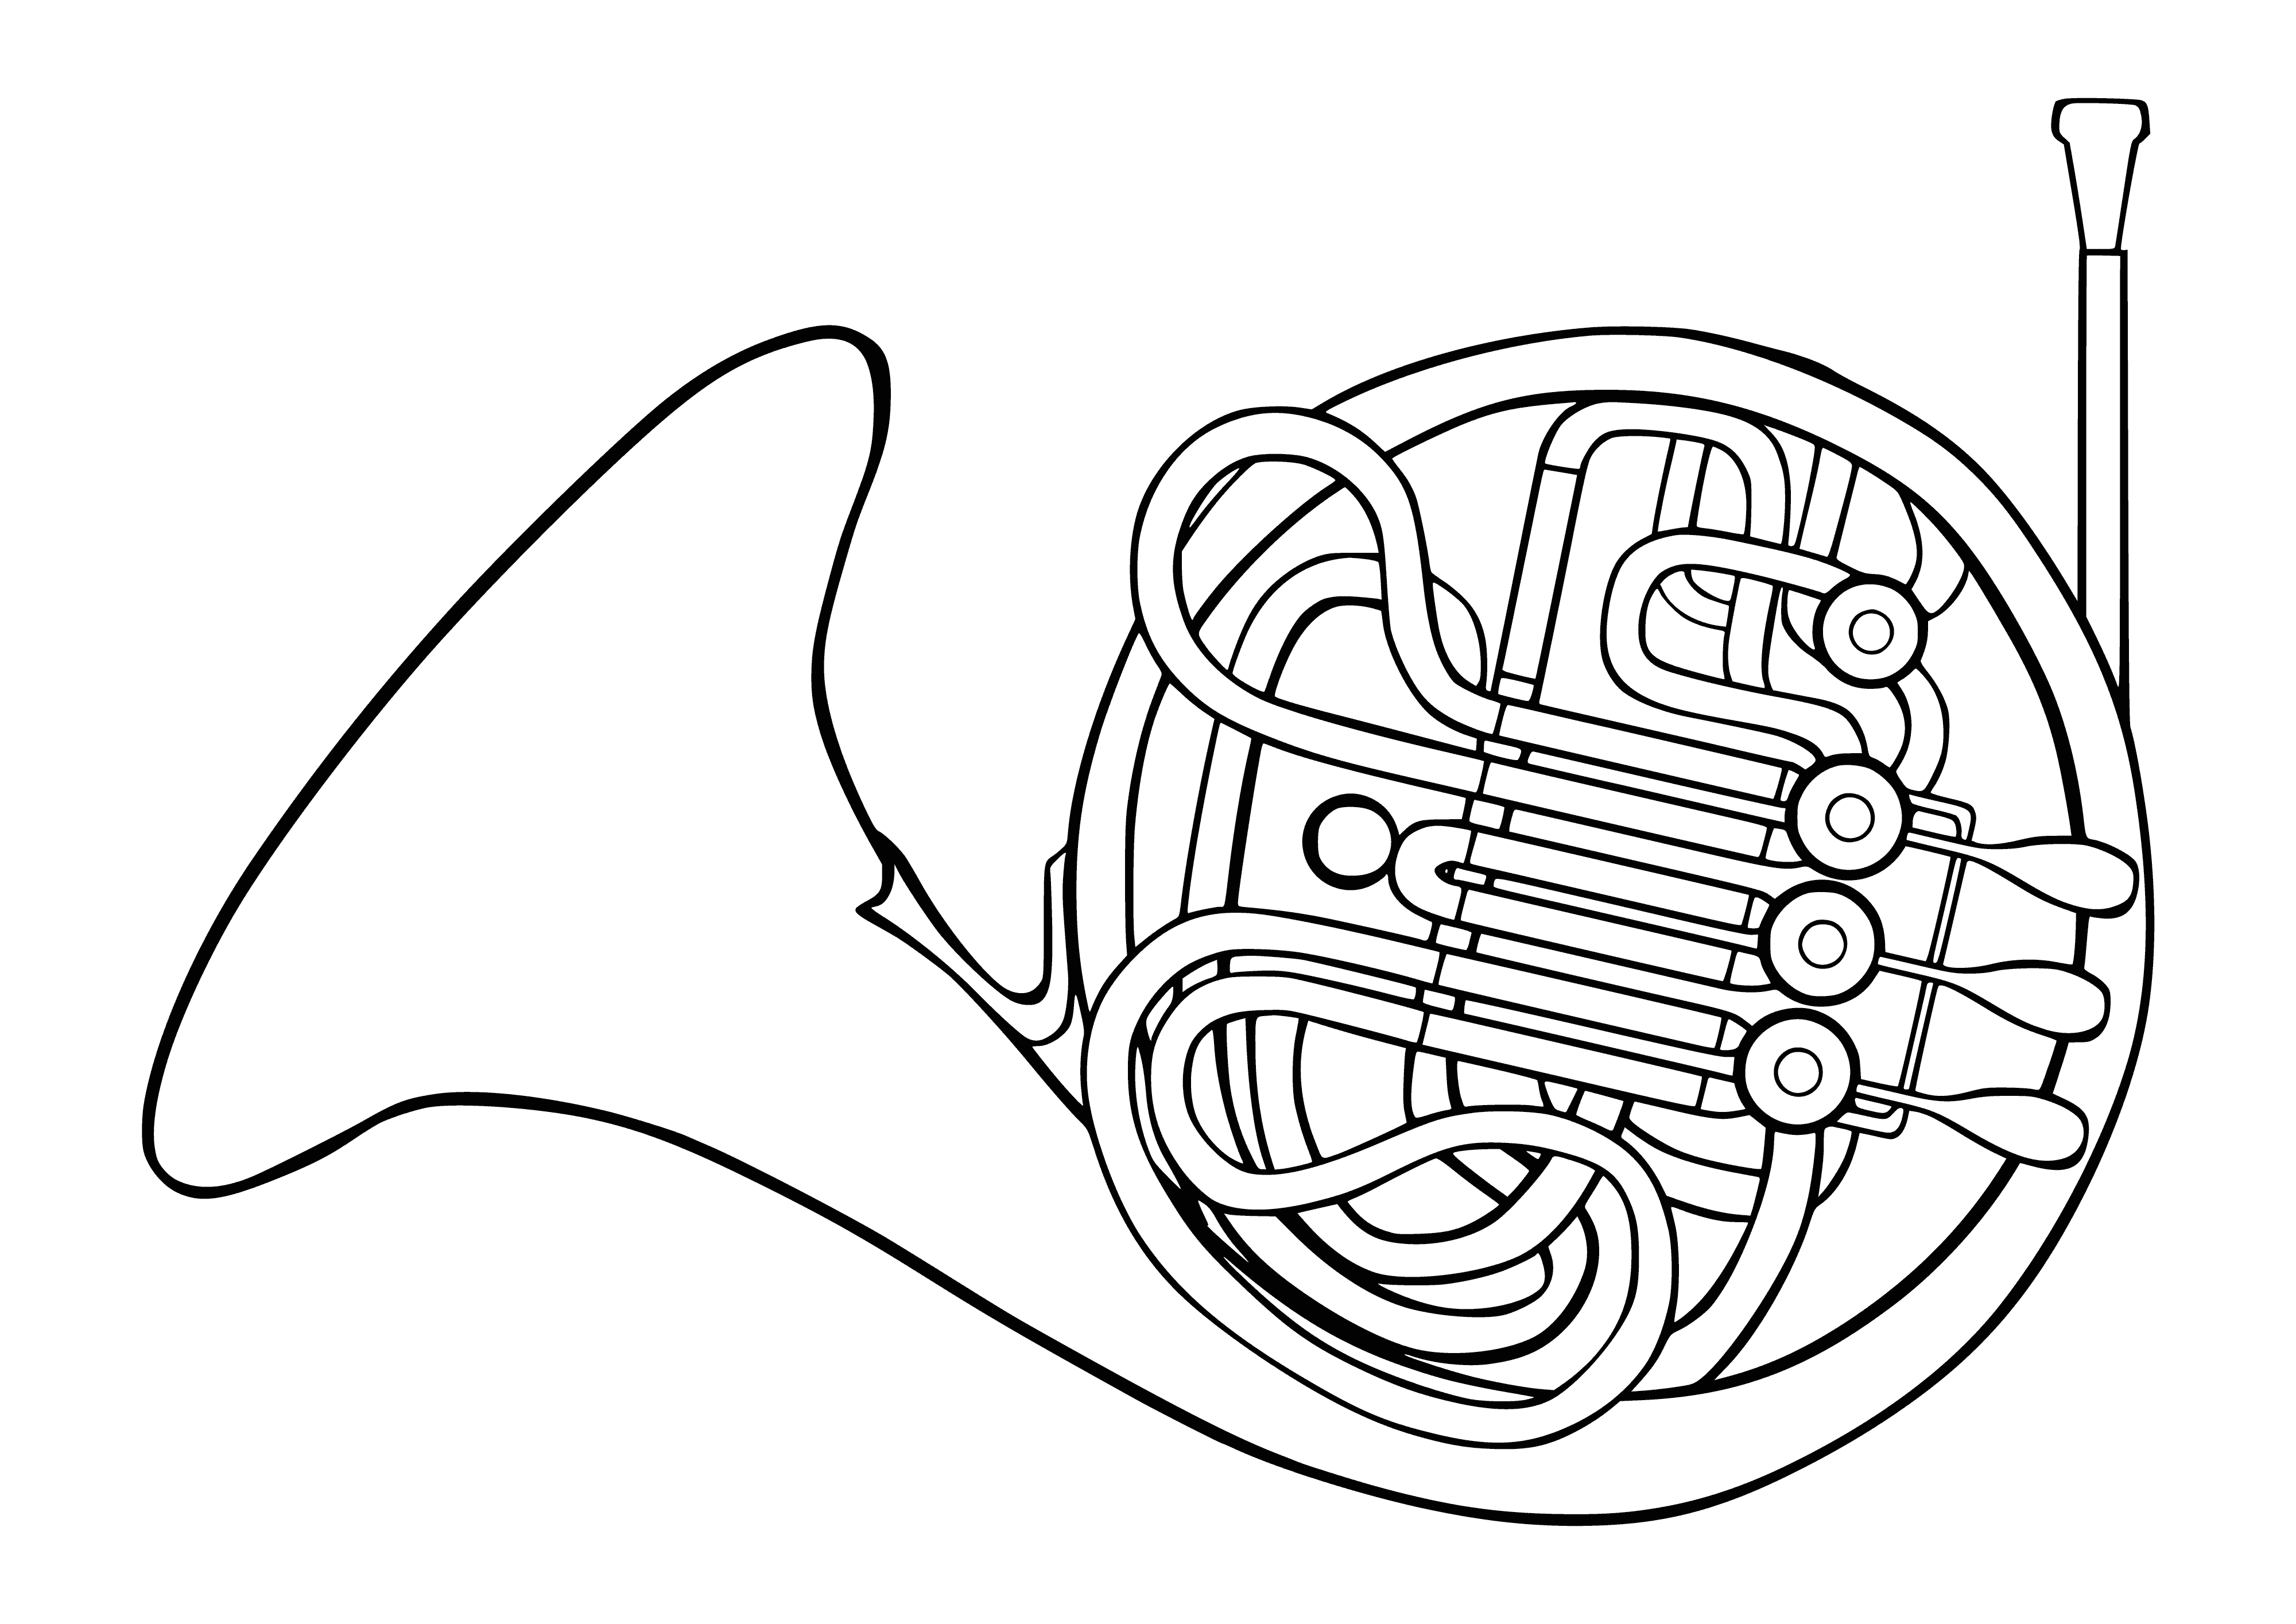 coloring page: Fun coloring page with a gold & black French horn on stand; mouthpiece adds detail! #coloring #orchestra